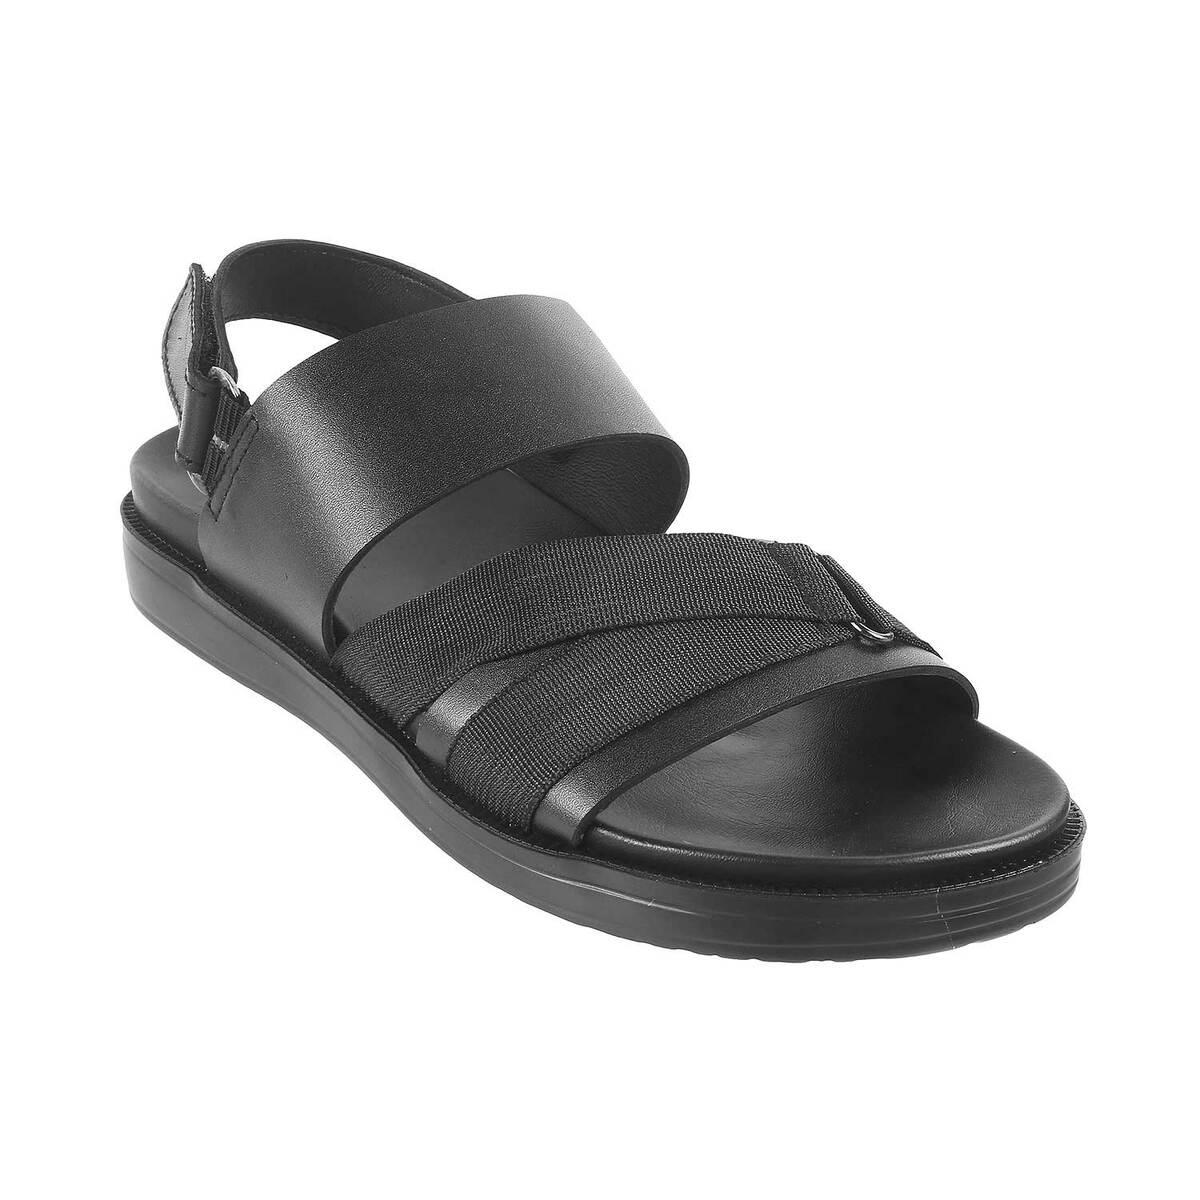 REFOAM Men's Black Synthetic Leather Slip On Casual Sandals – Refoam